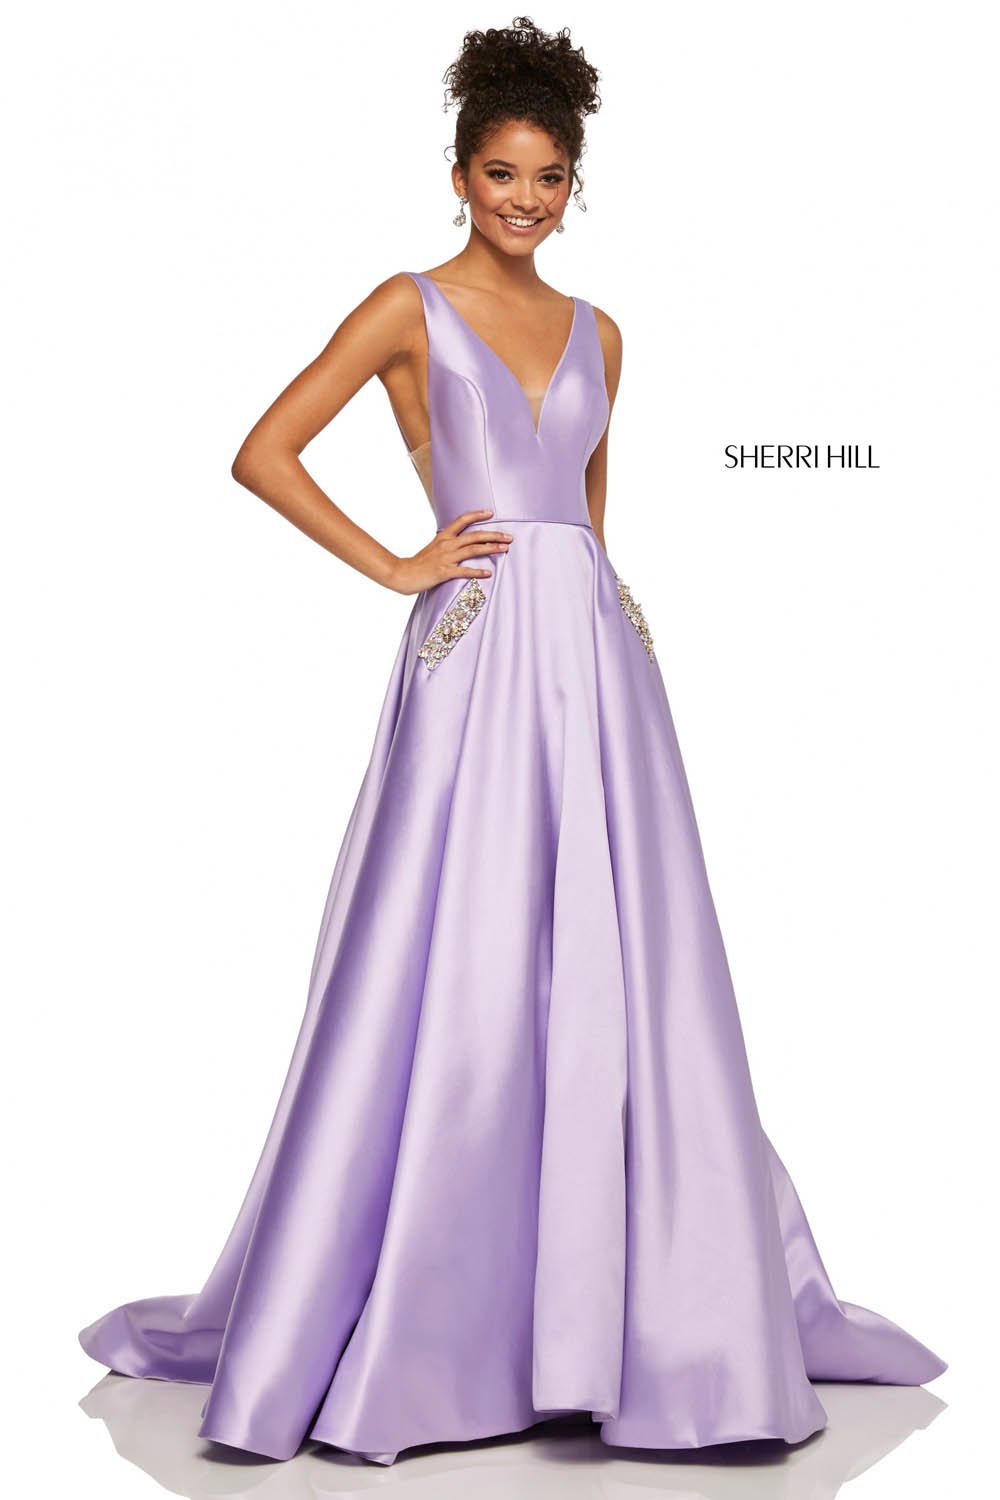 Sherri Hill 52726 dress images in these colors: Lilac, Red, Light Blue, Yellow, Black, Ivory.